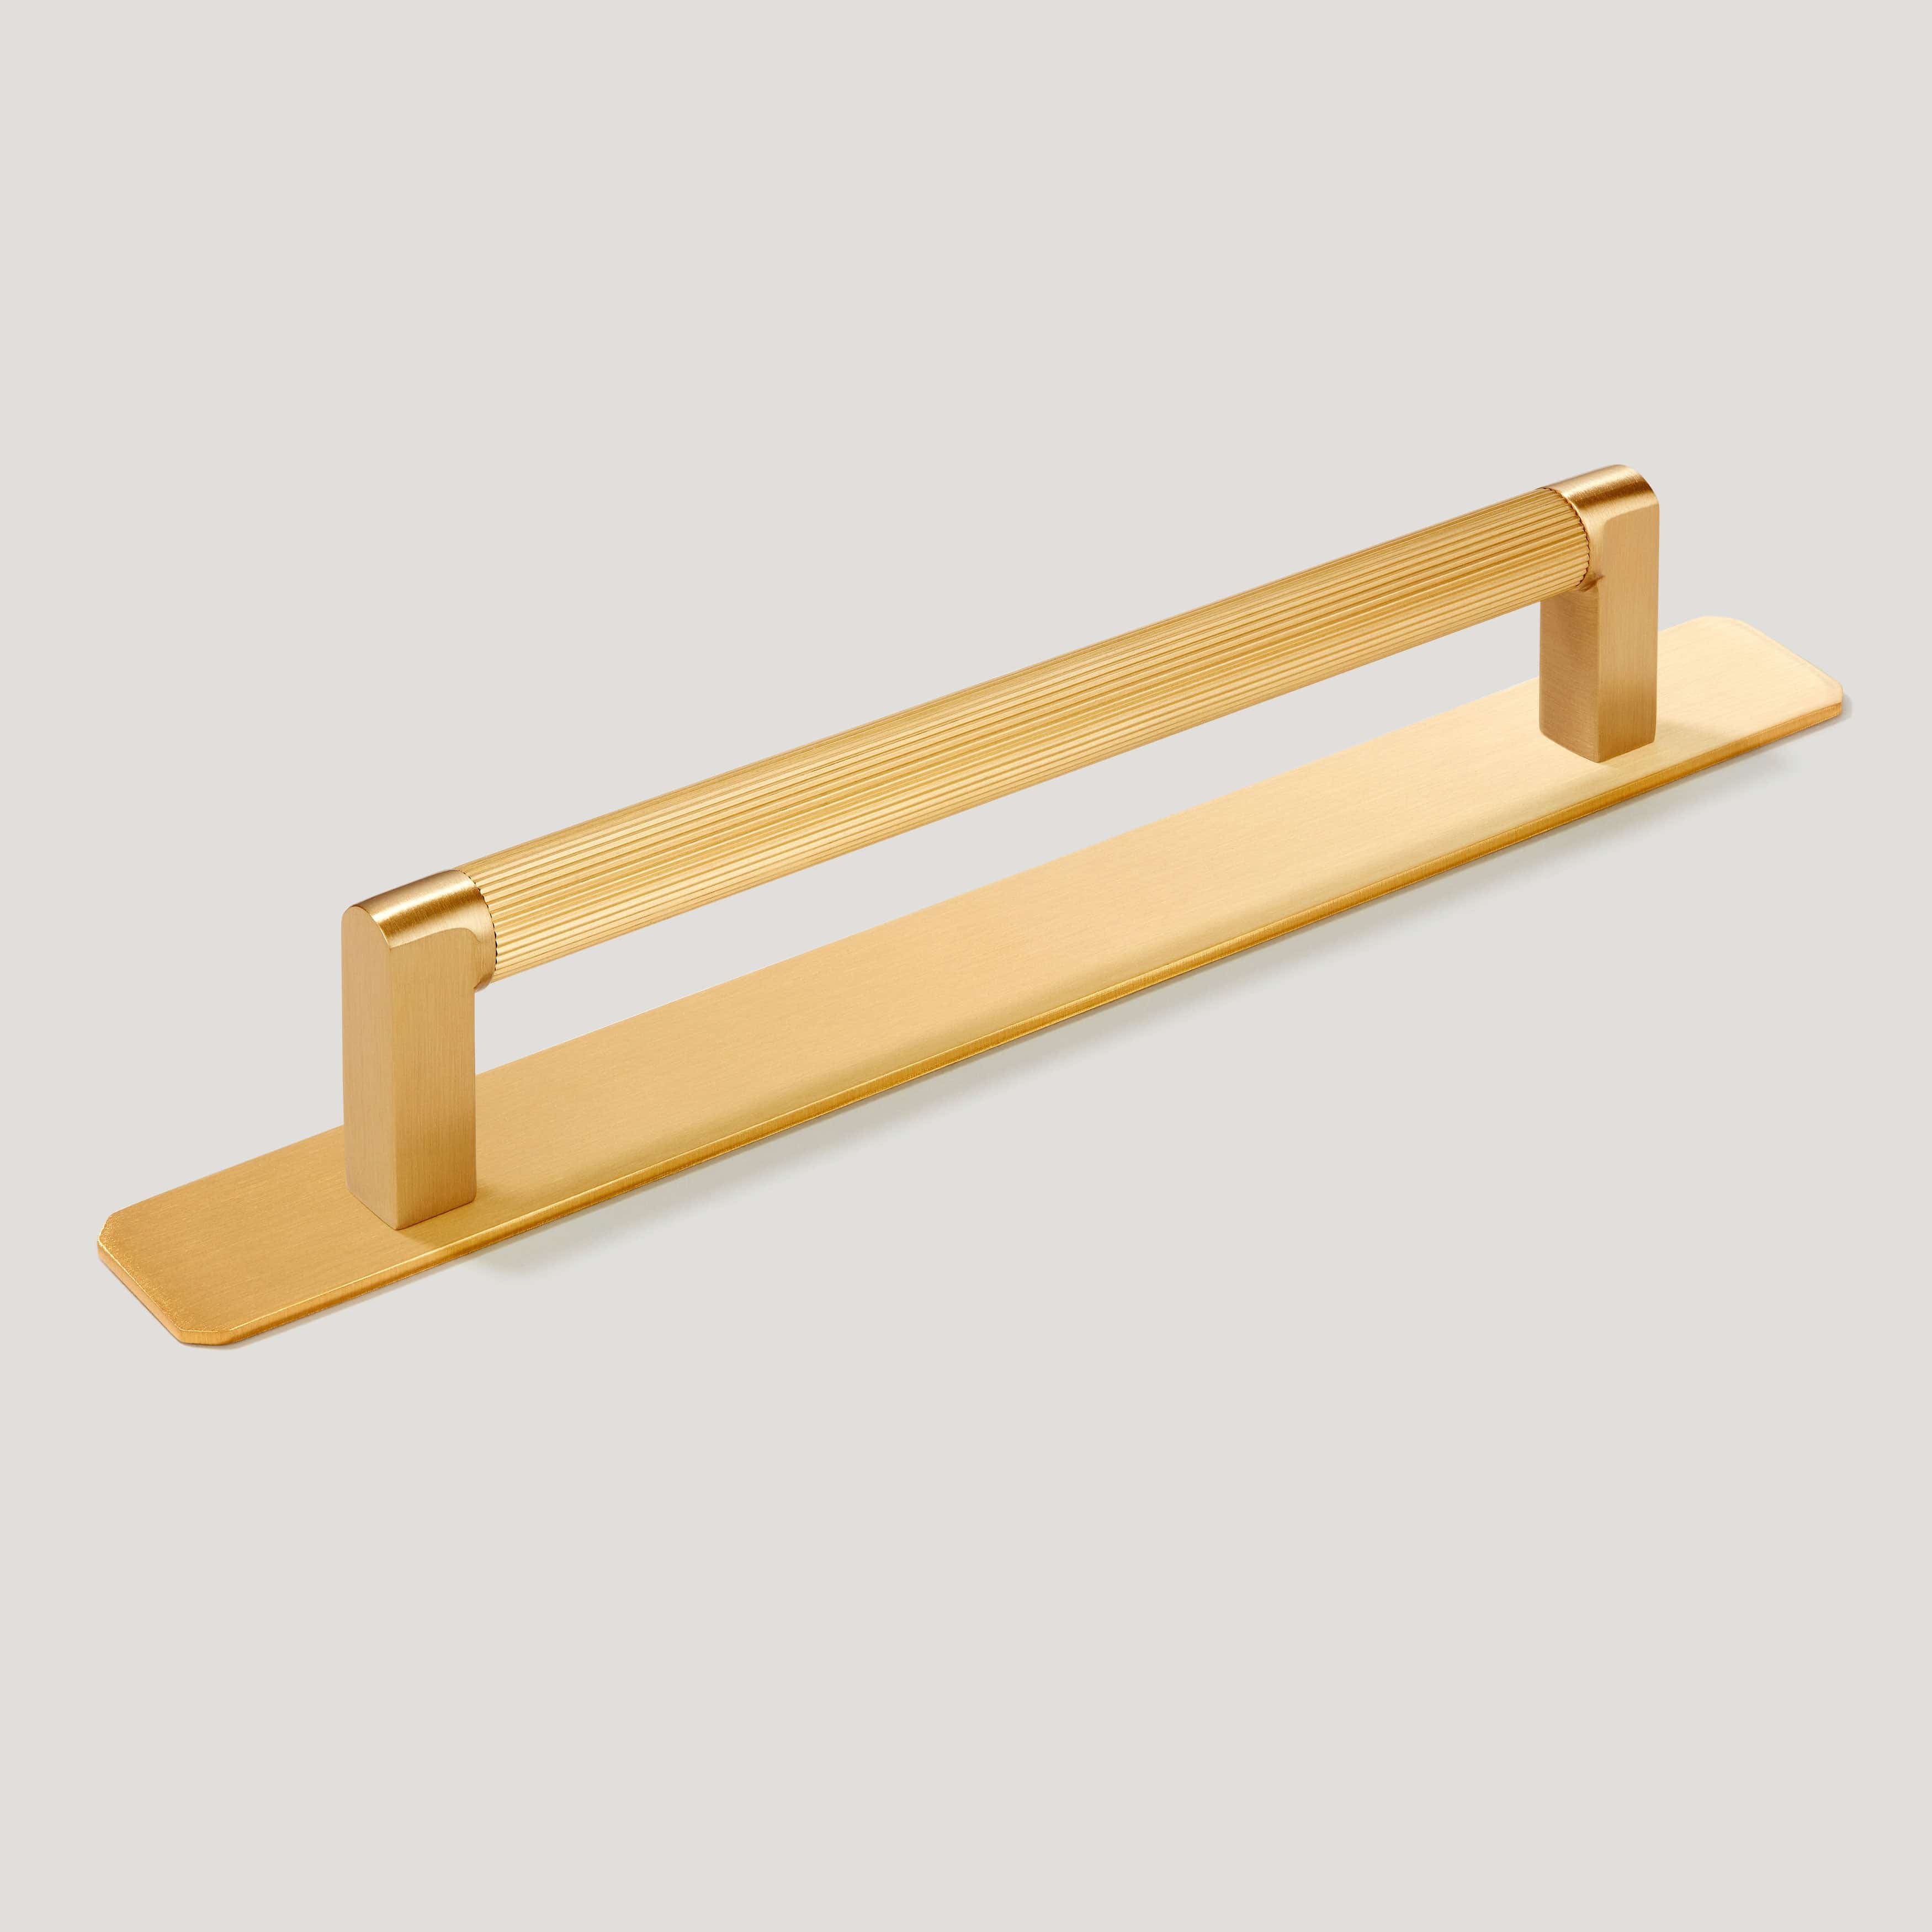 Plank Hardware Handles & Knobs 170mm (160mm CC) / Handle with Backplate BECKER Grooved D-Bar Handle - Brass